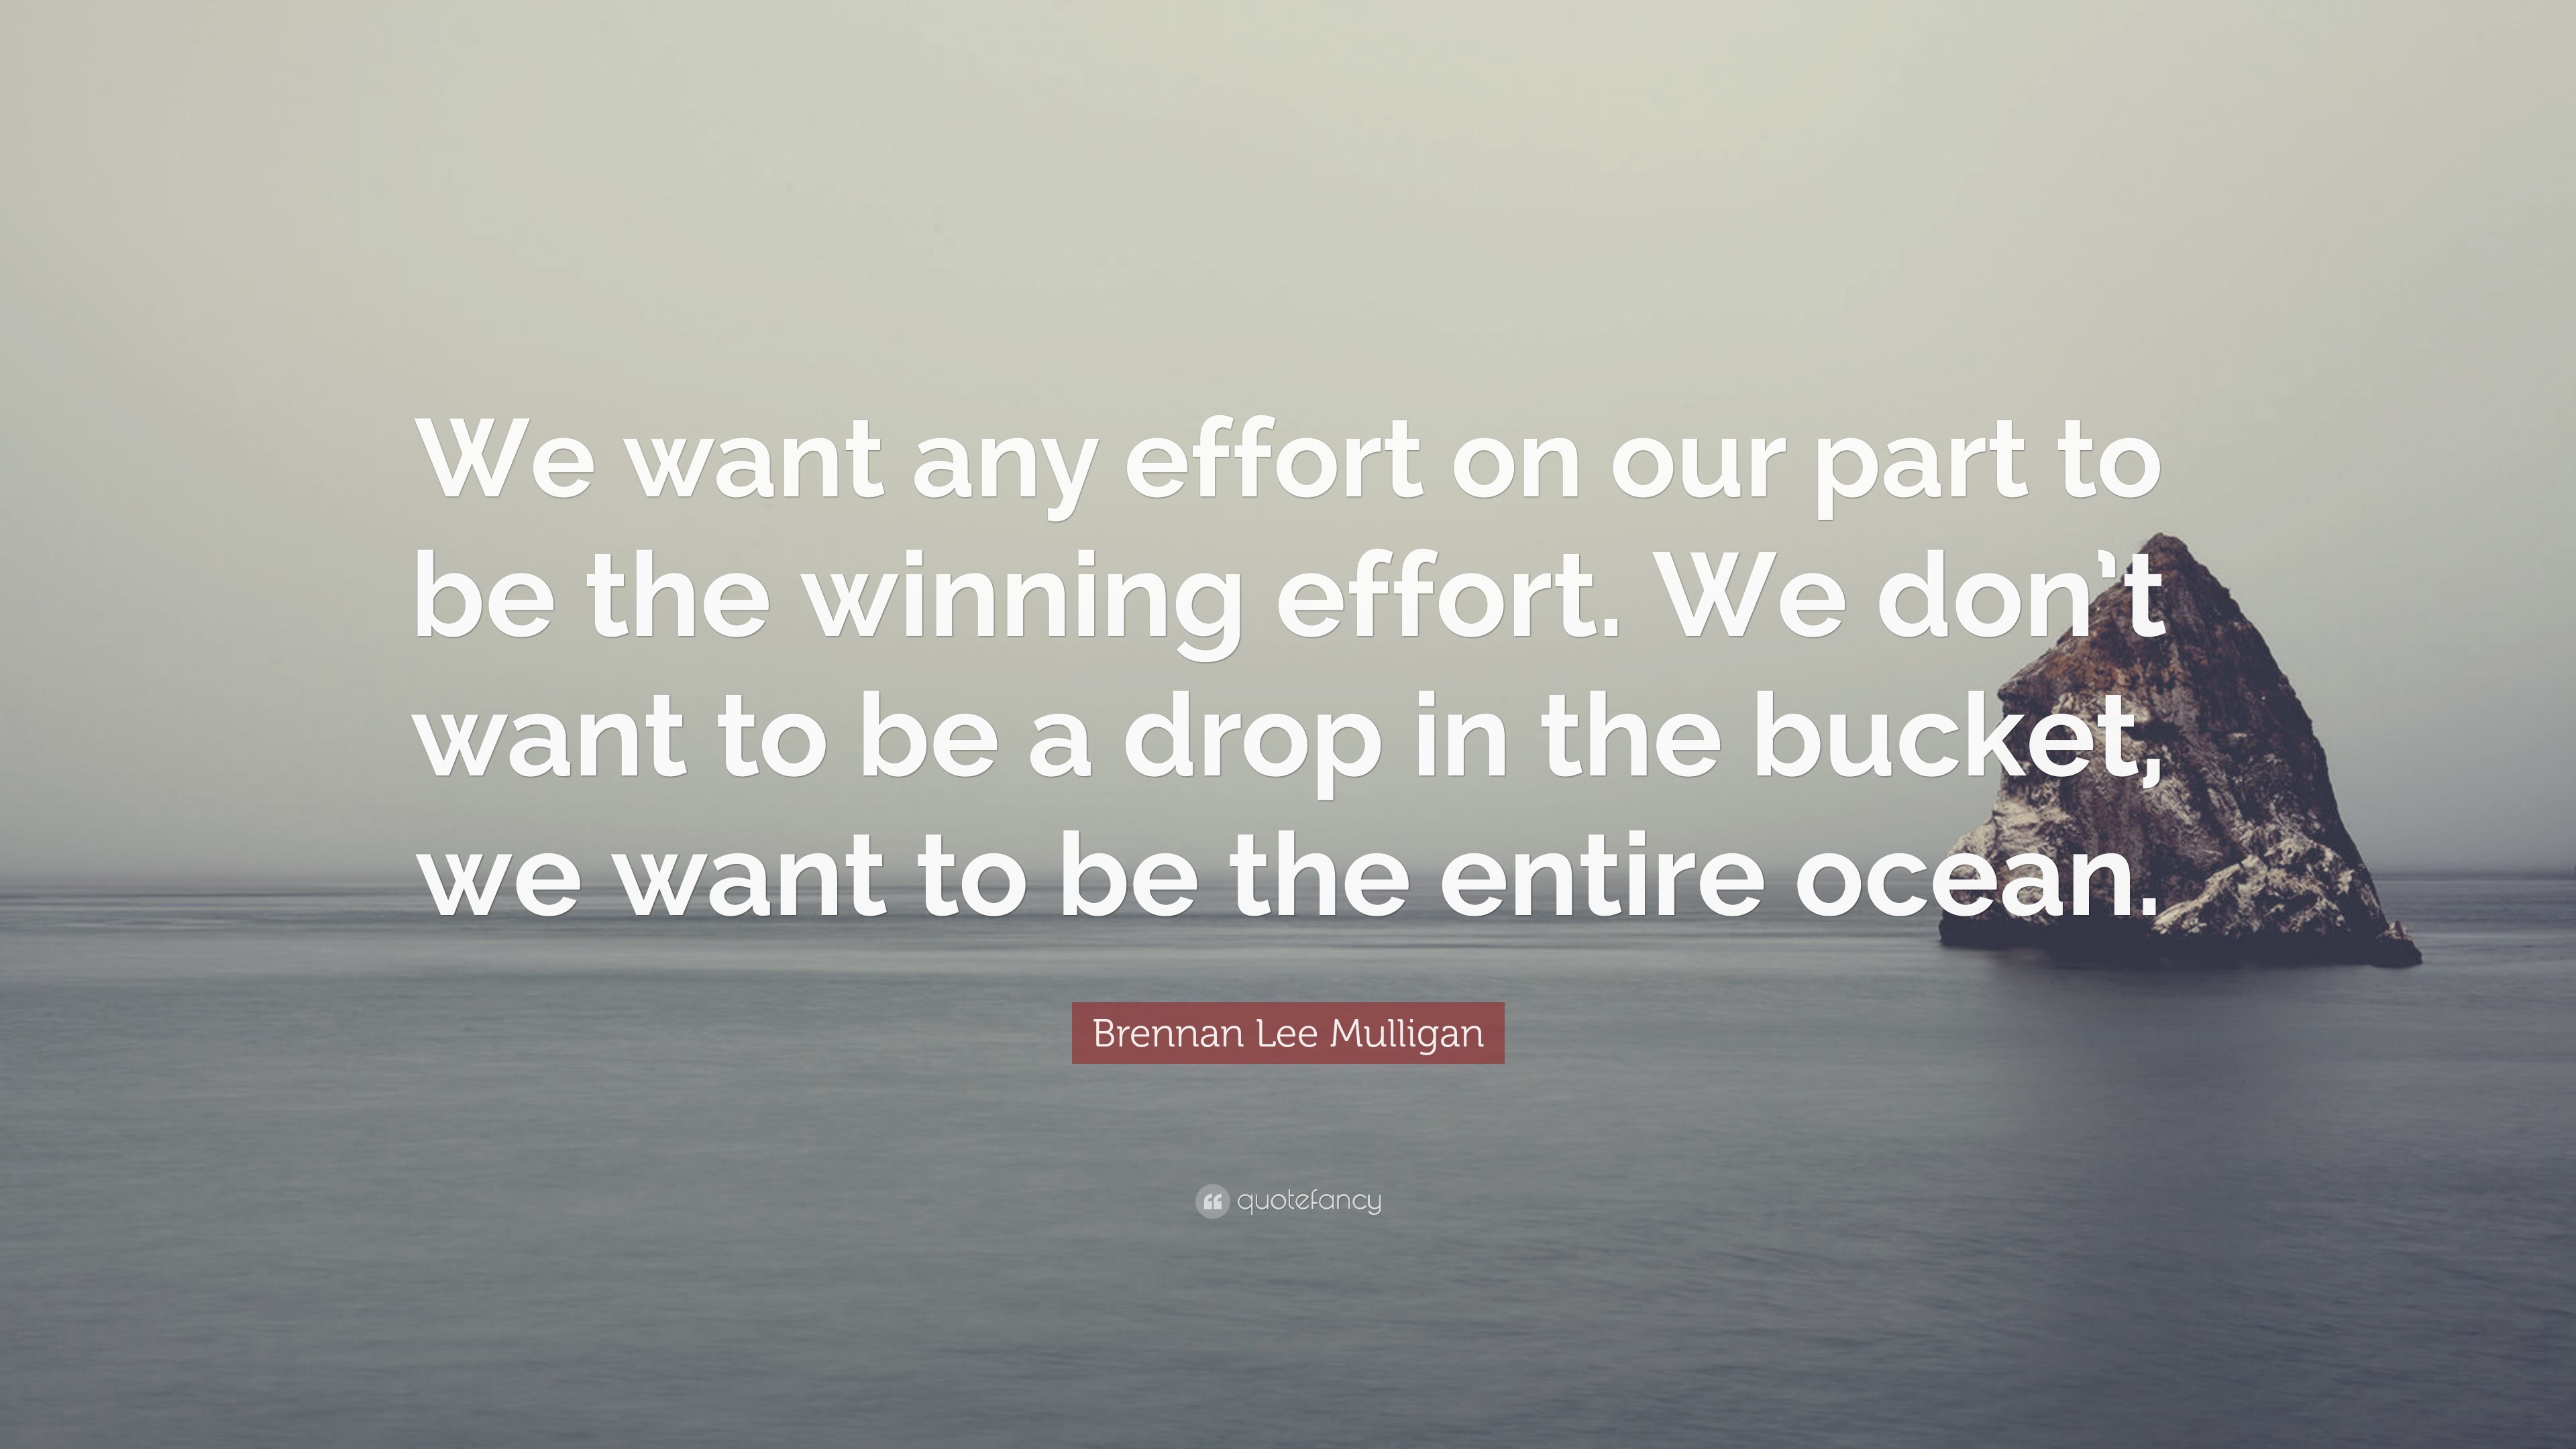 Brennan Lee Mulligan Quote: “We want any effort on our part to be the  winning effort. We don't want to be a drop in the bucket, we want to be the  ent...”